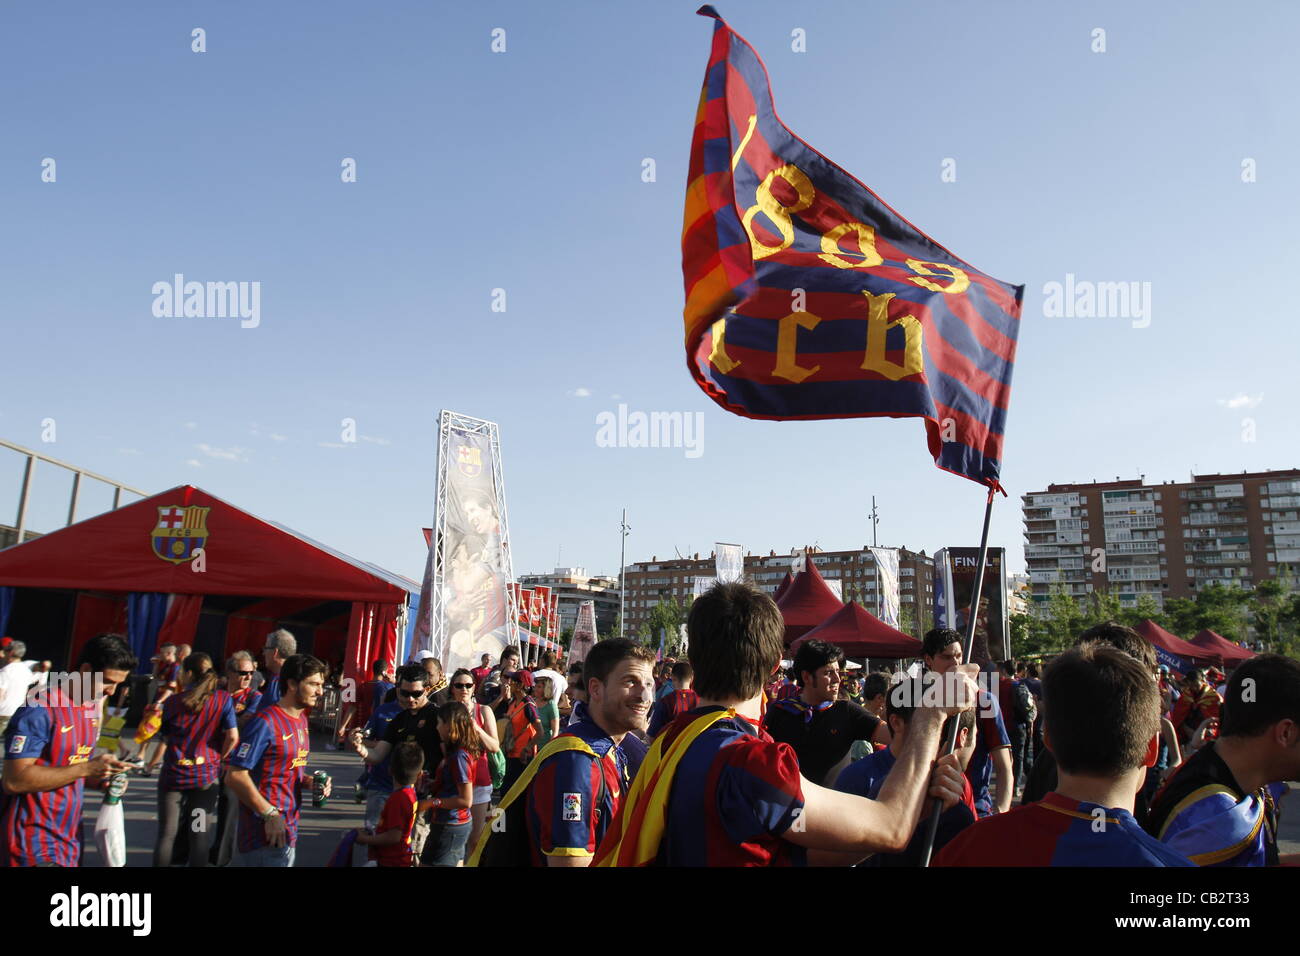 Futbol Final Copa del Rey - Spain Cup - Madrid - Rio Manzanares, Barcelona Fan Zone; Barcelona supporters meet before the beginning of the match Stock Photo